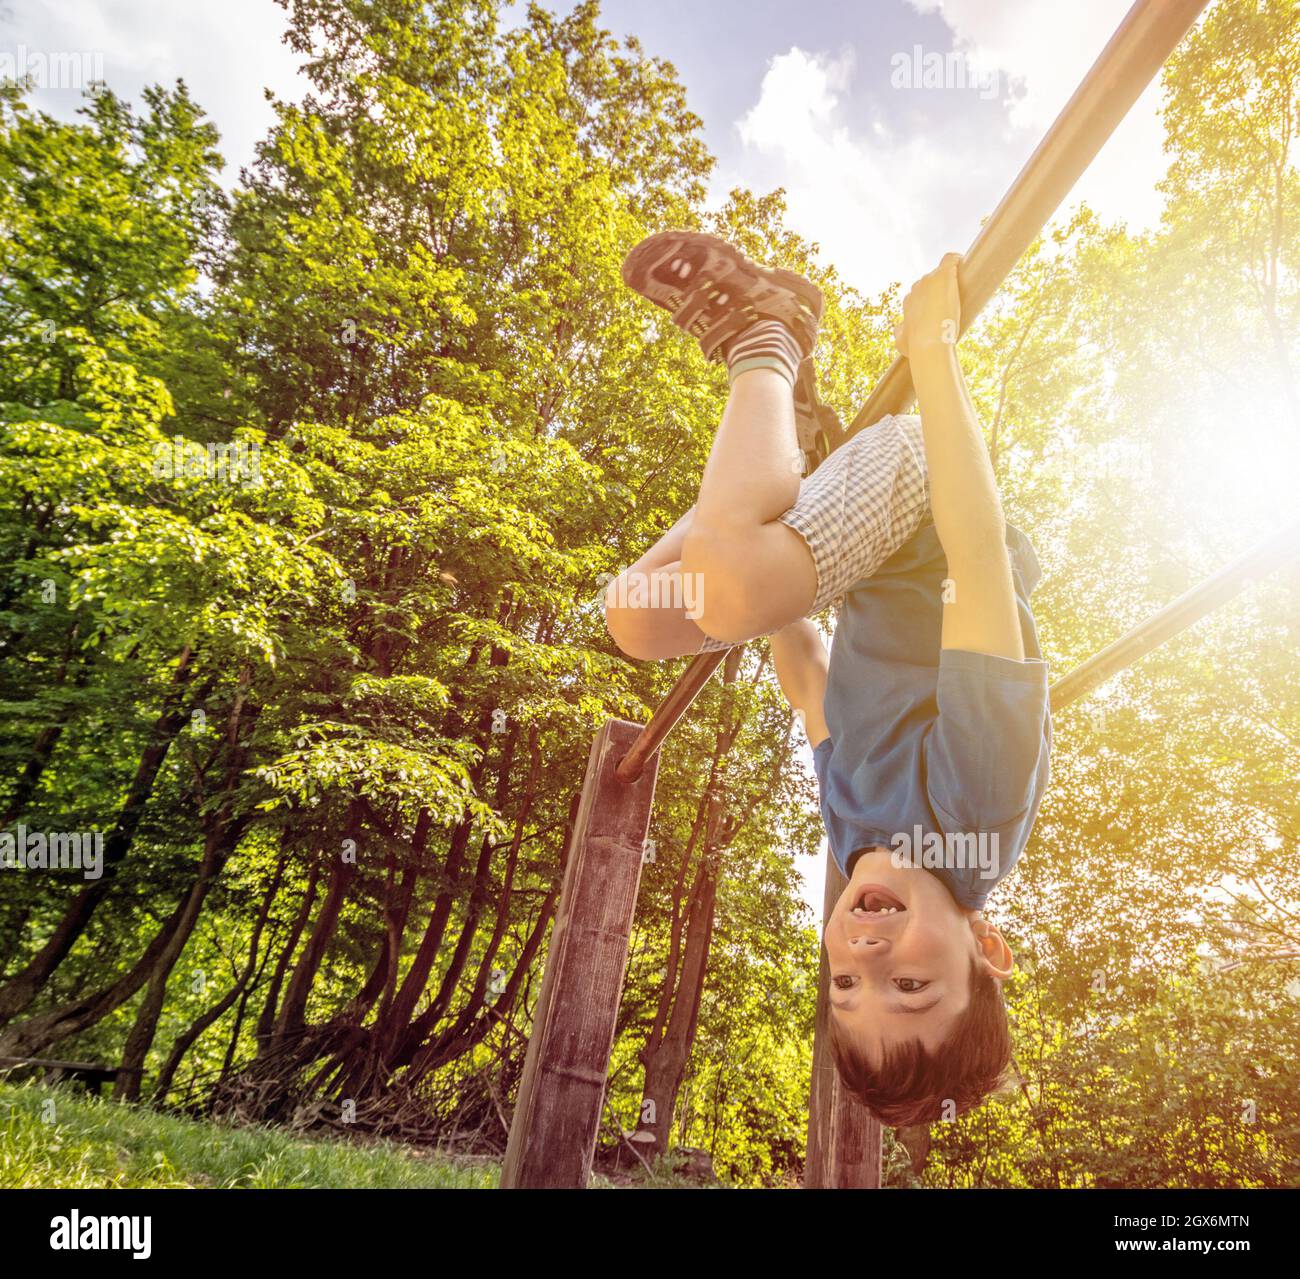 Happy child boy hanging upside  down on bar, playground in forest, outdoor activities Stock Photo